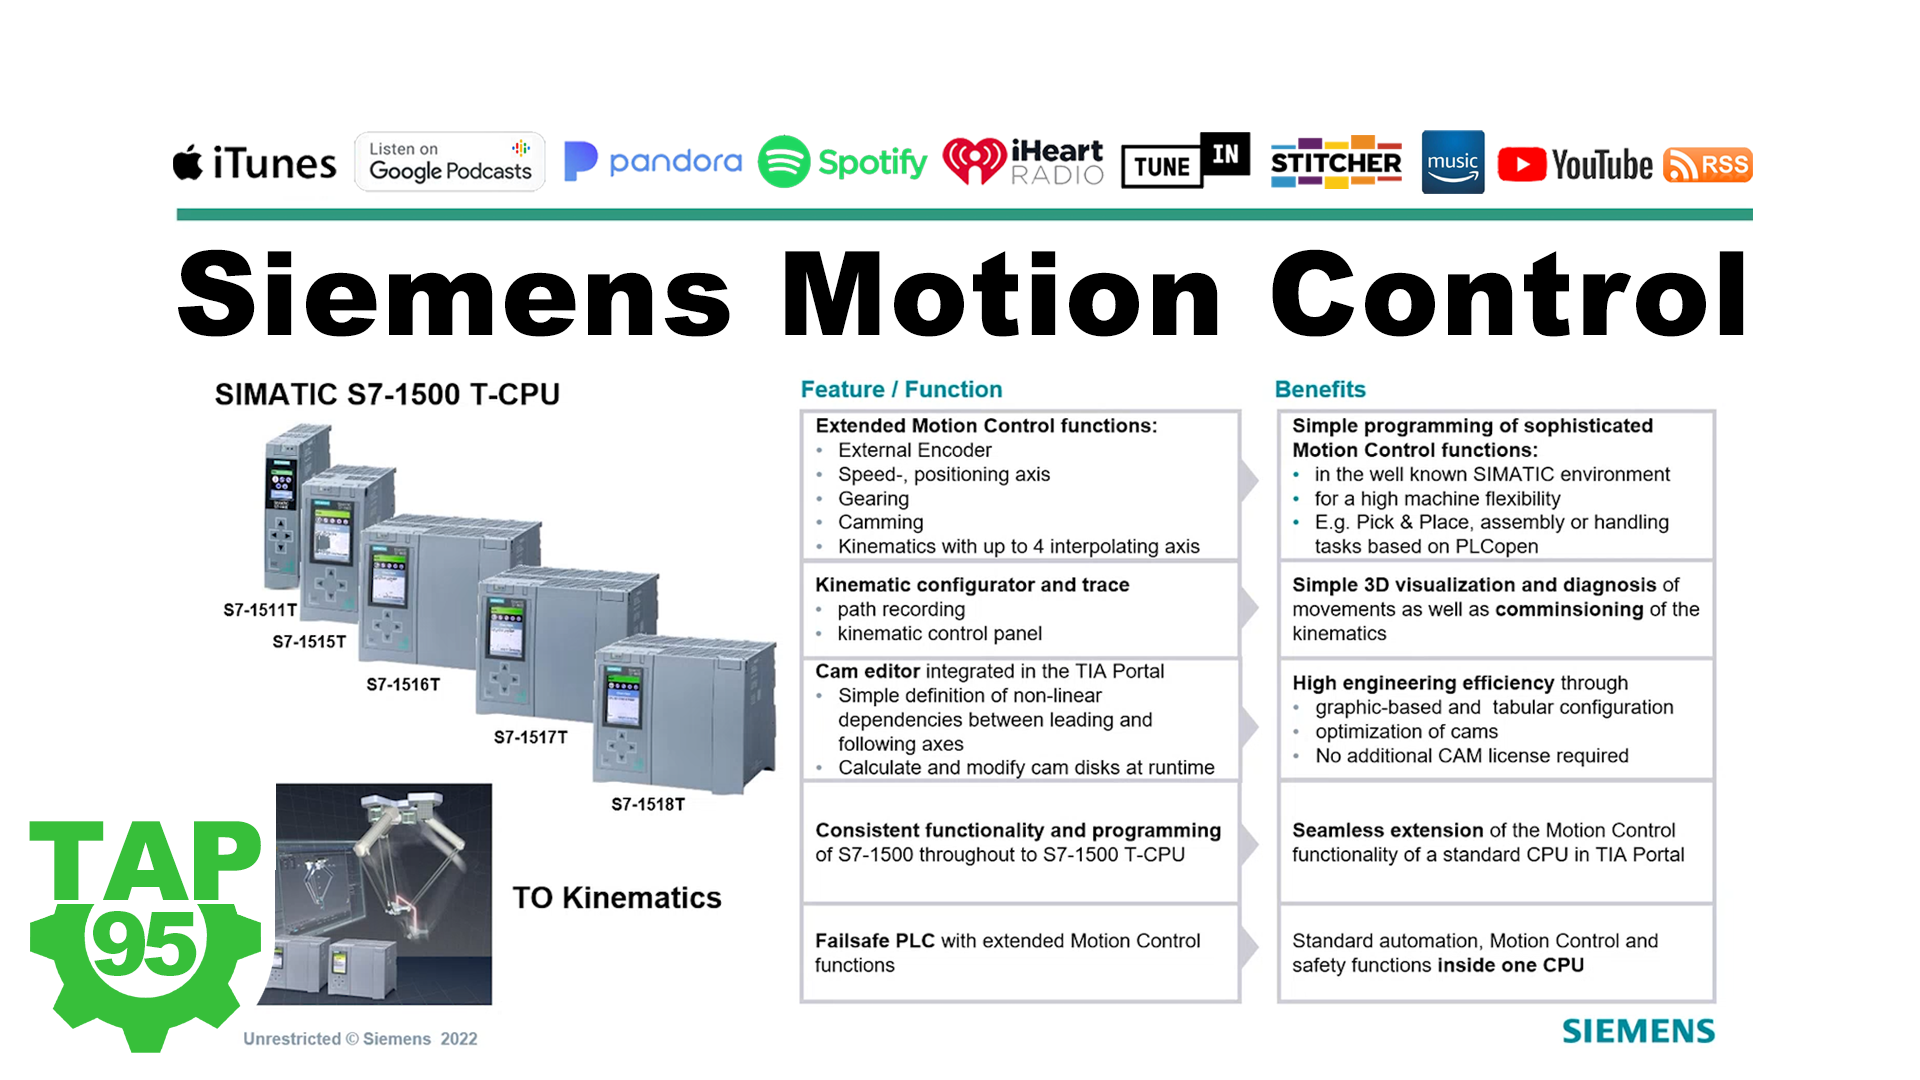 Siemens Motion Control Overview (P95)